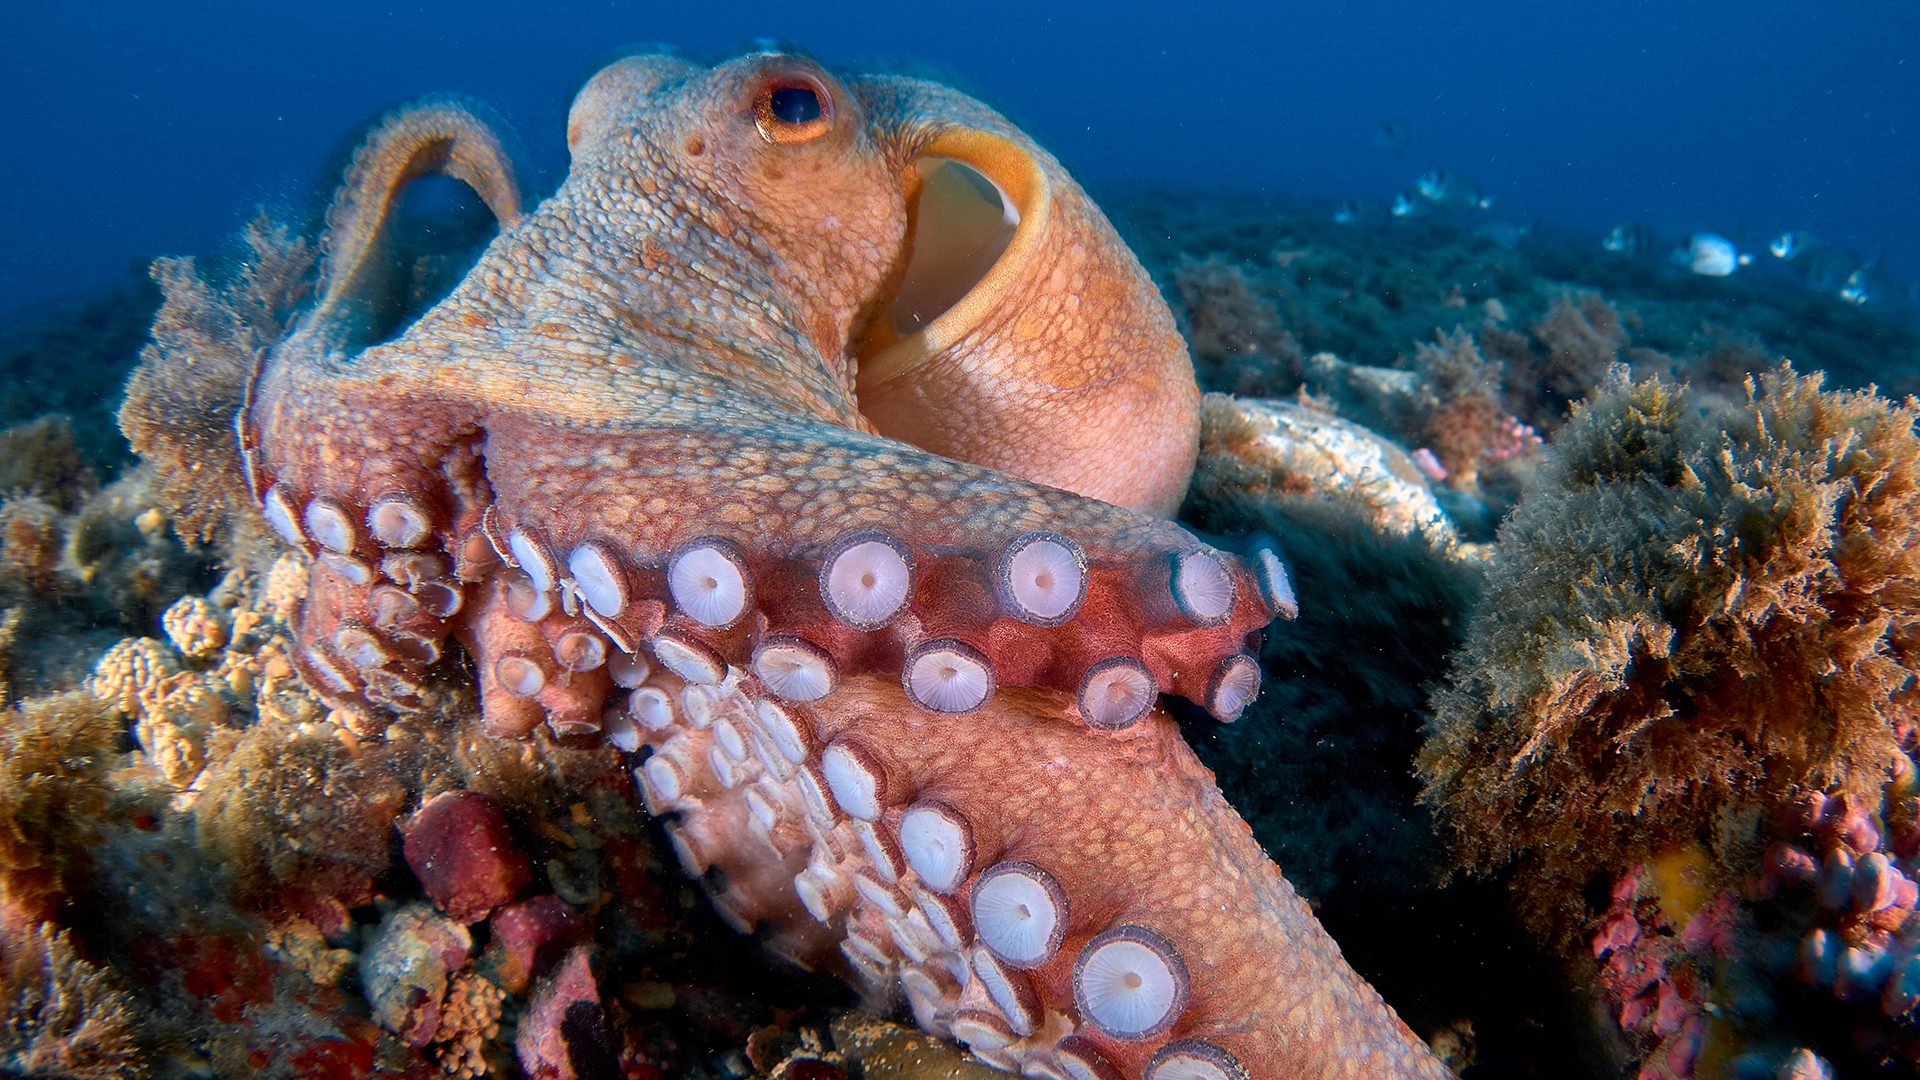 Octopuses may be so terrifyingly smart because they share humans' genes for intelligence